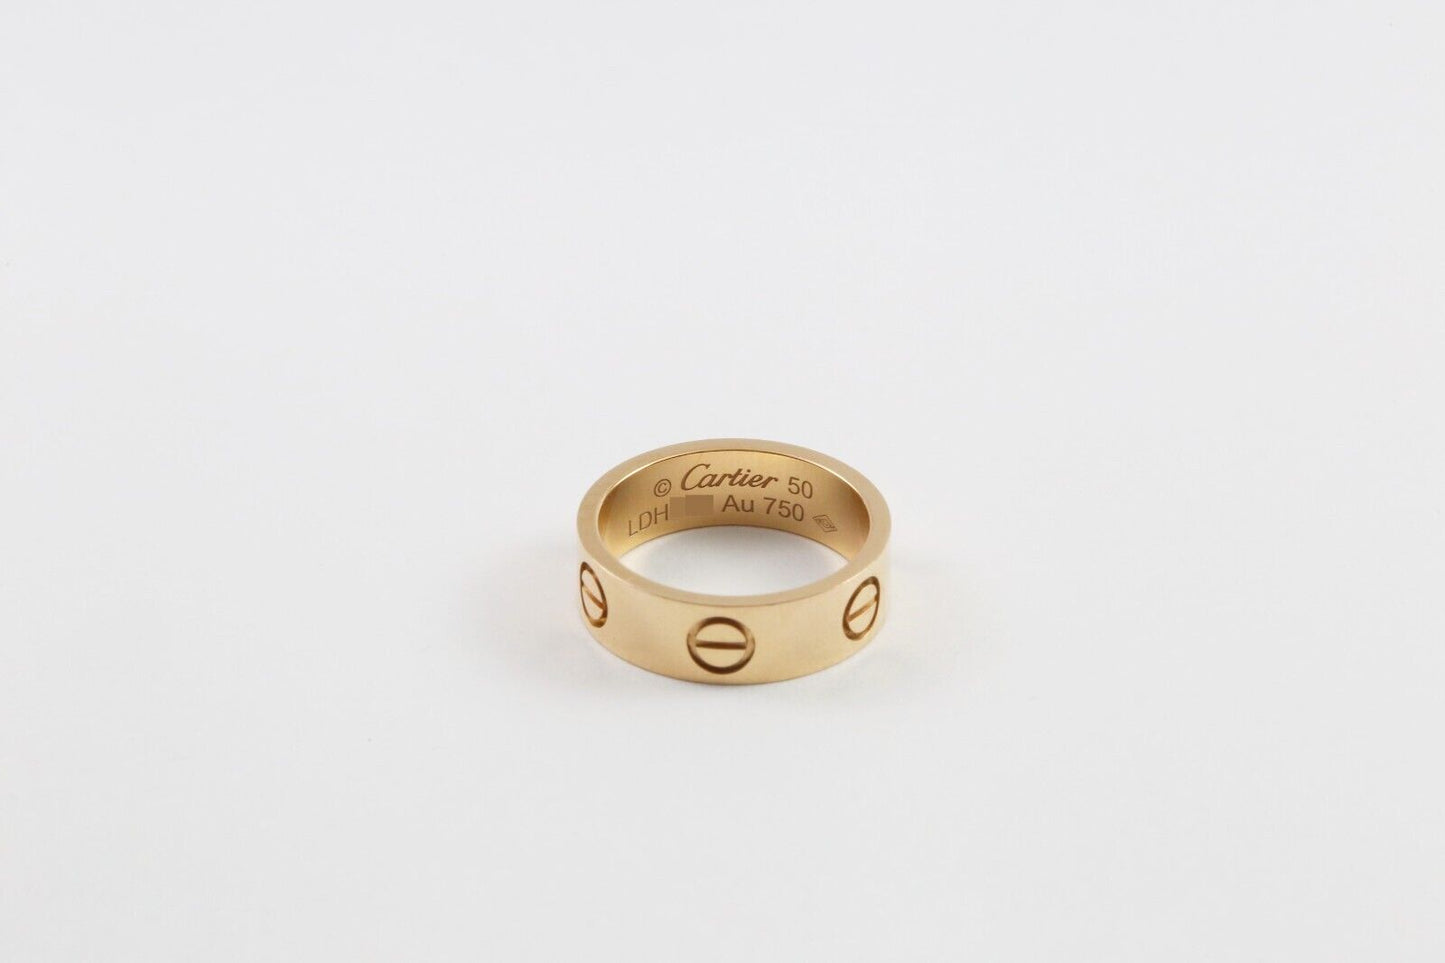 Cartier 18K Rose Gold Love Ring Size 5.25 - 5.5g